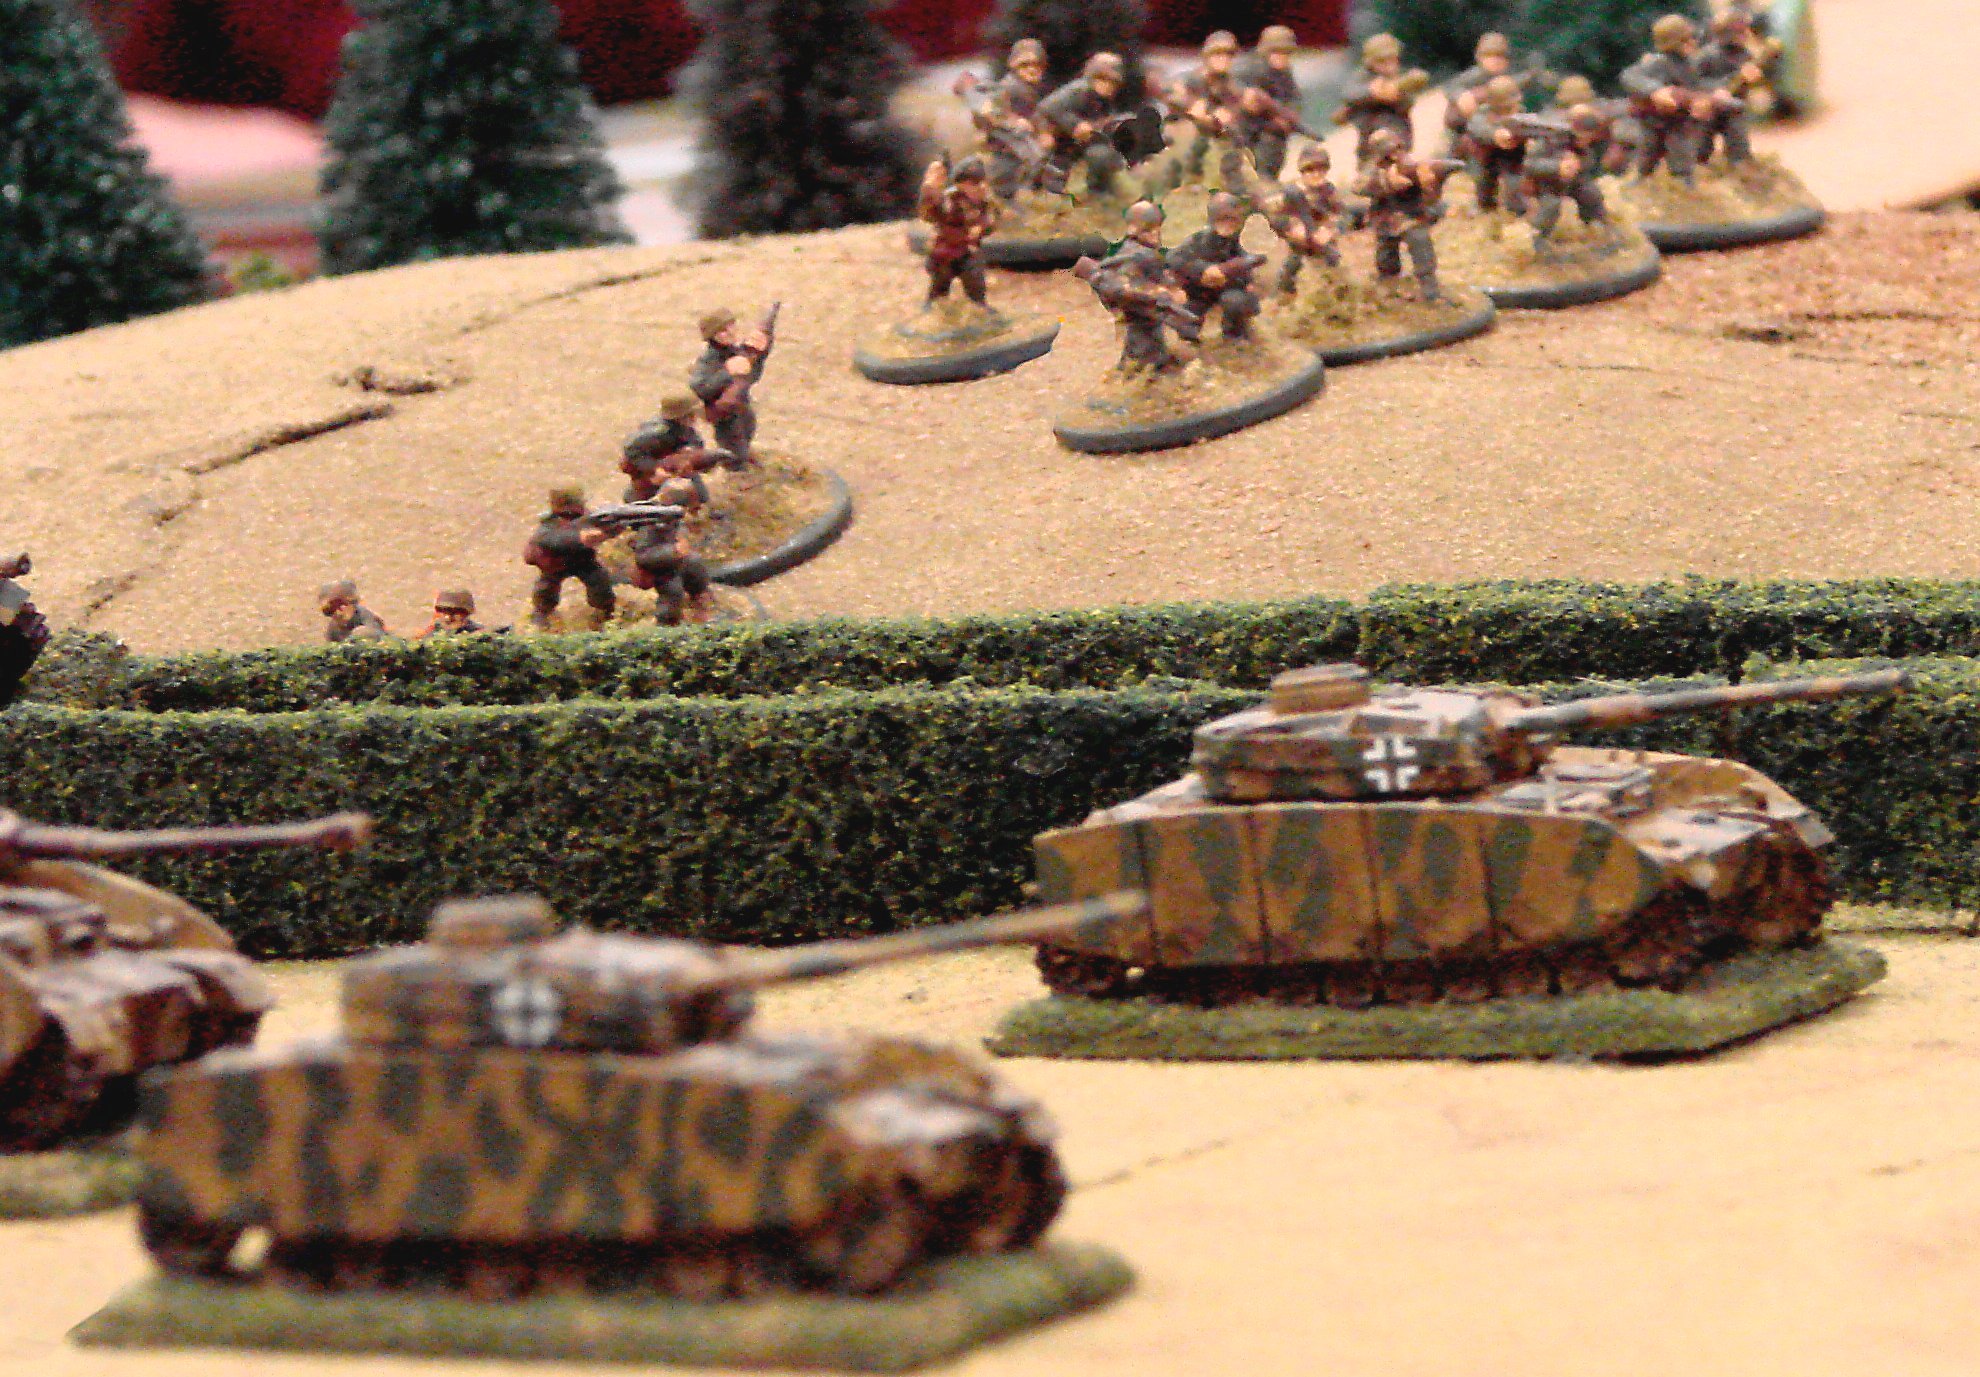 Back on the right flank the Panzers have sorted themselves out after the artillery barrage, and cover the flank of their infantry.